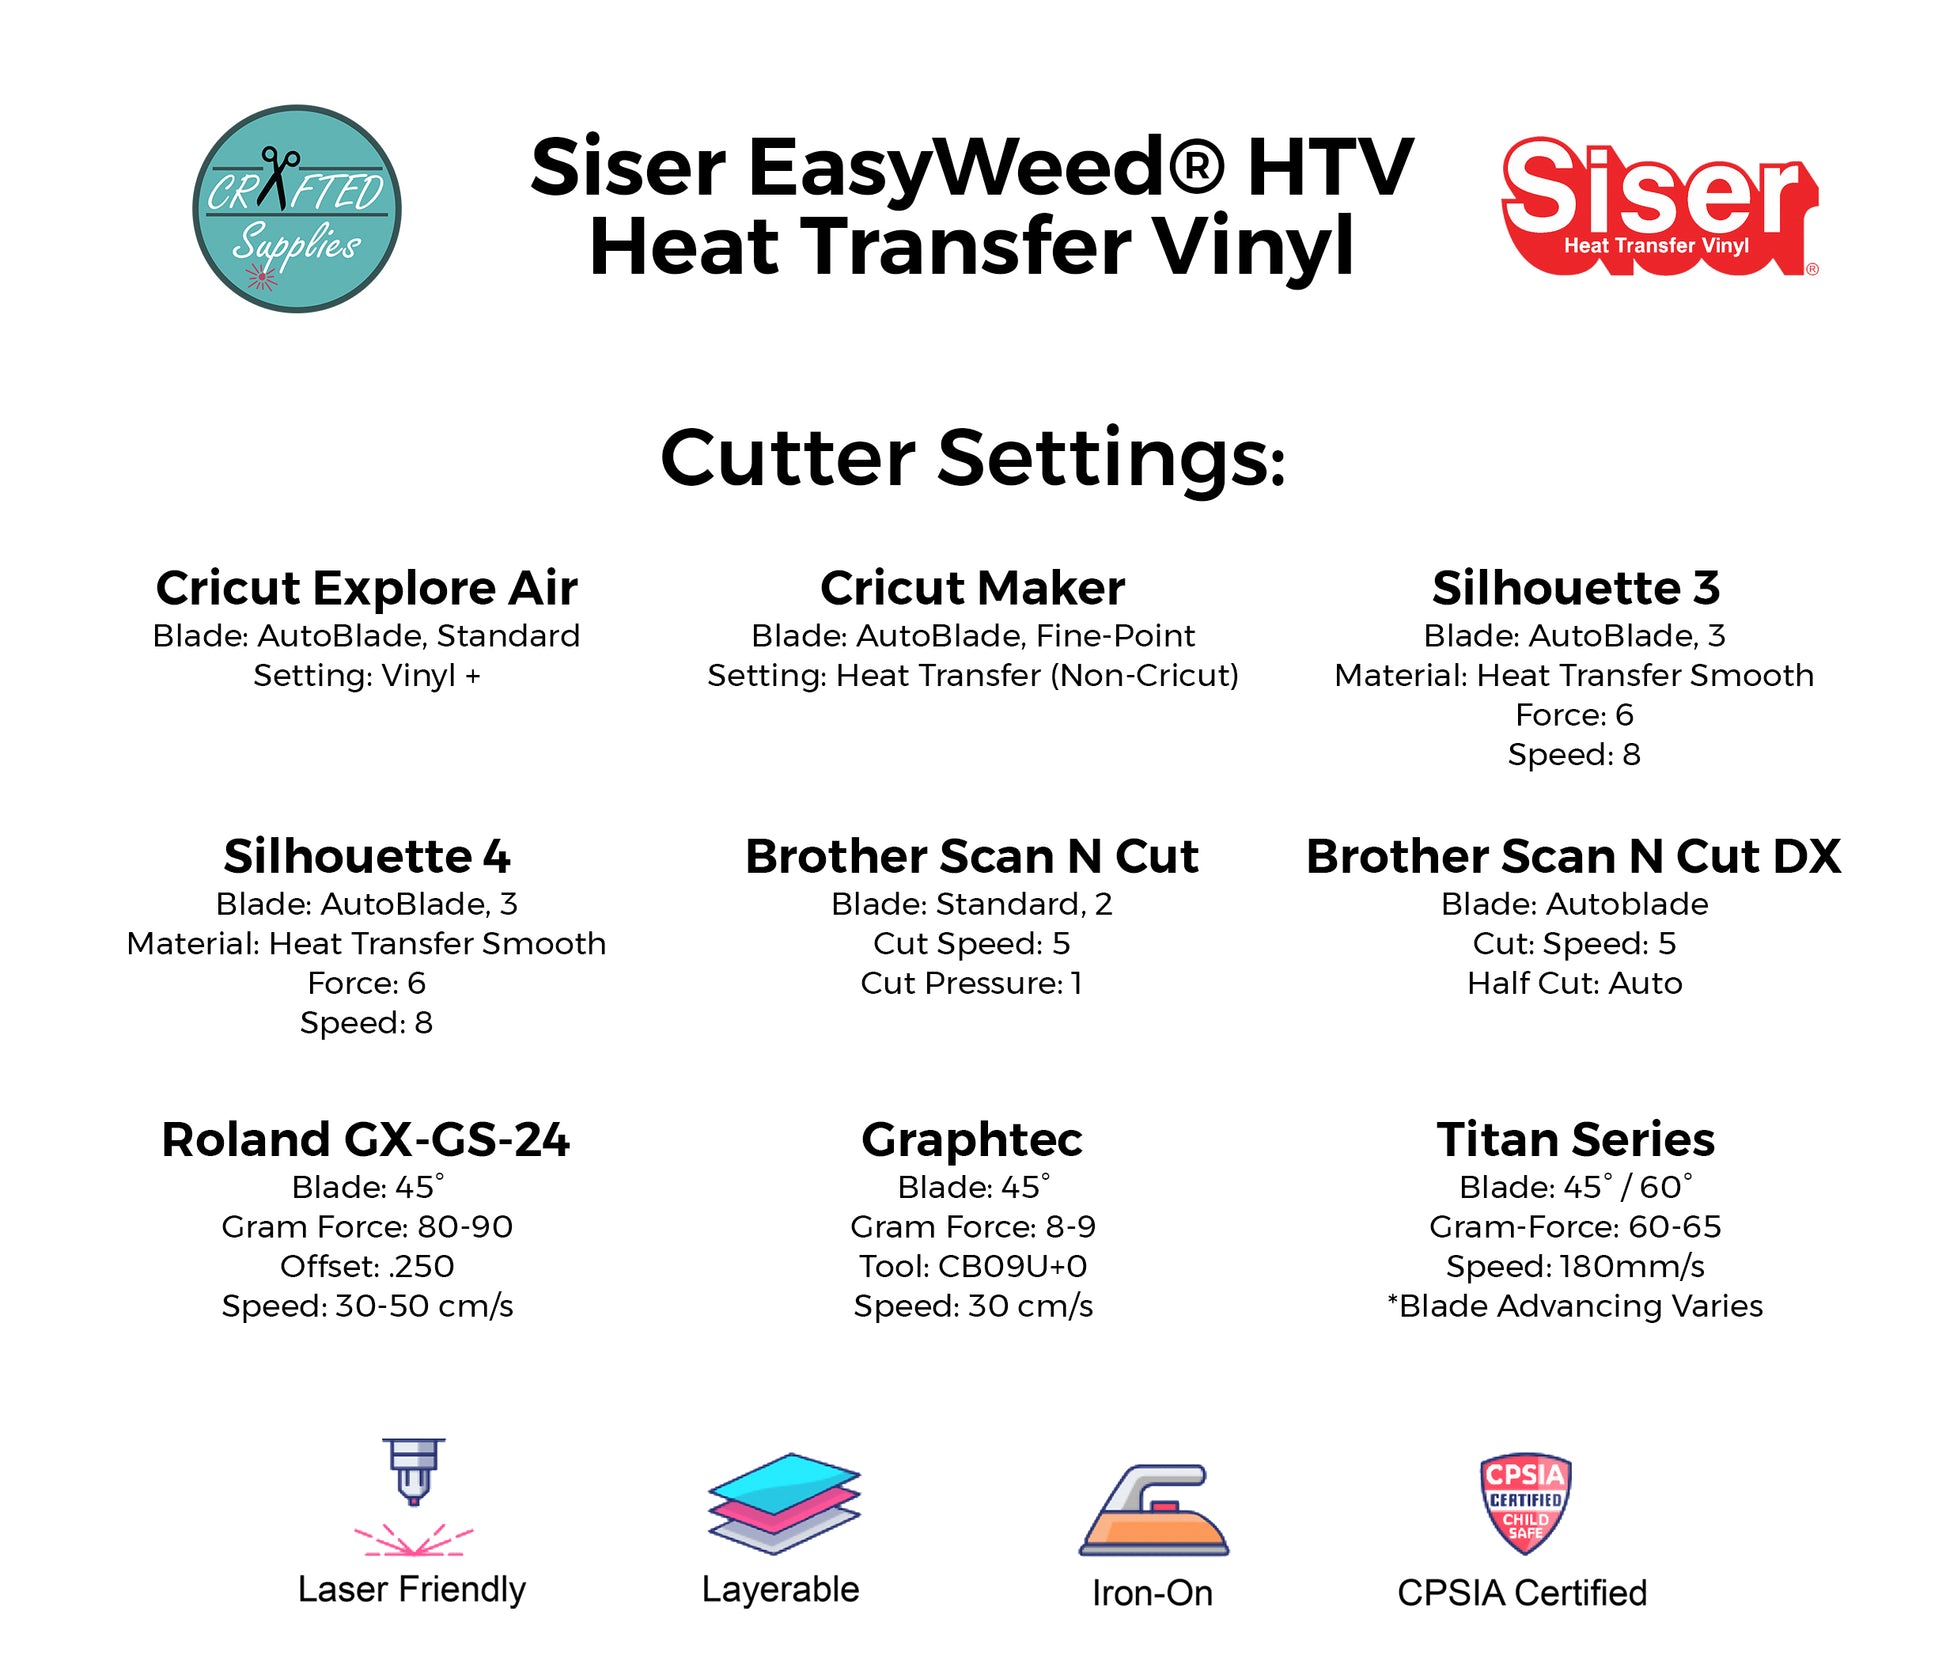 Cheat Sheet HTV Sizing Chart - Complete Guideline – Ahijoy